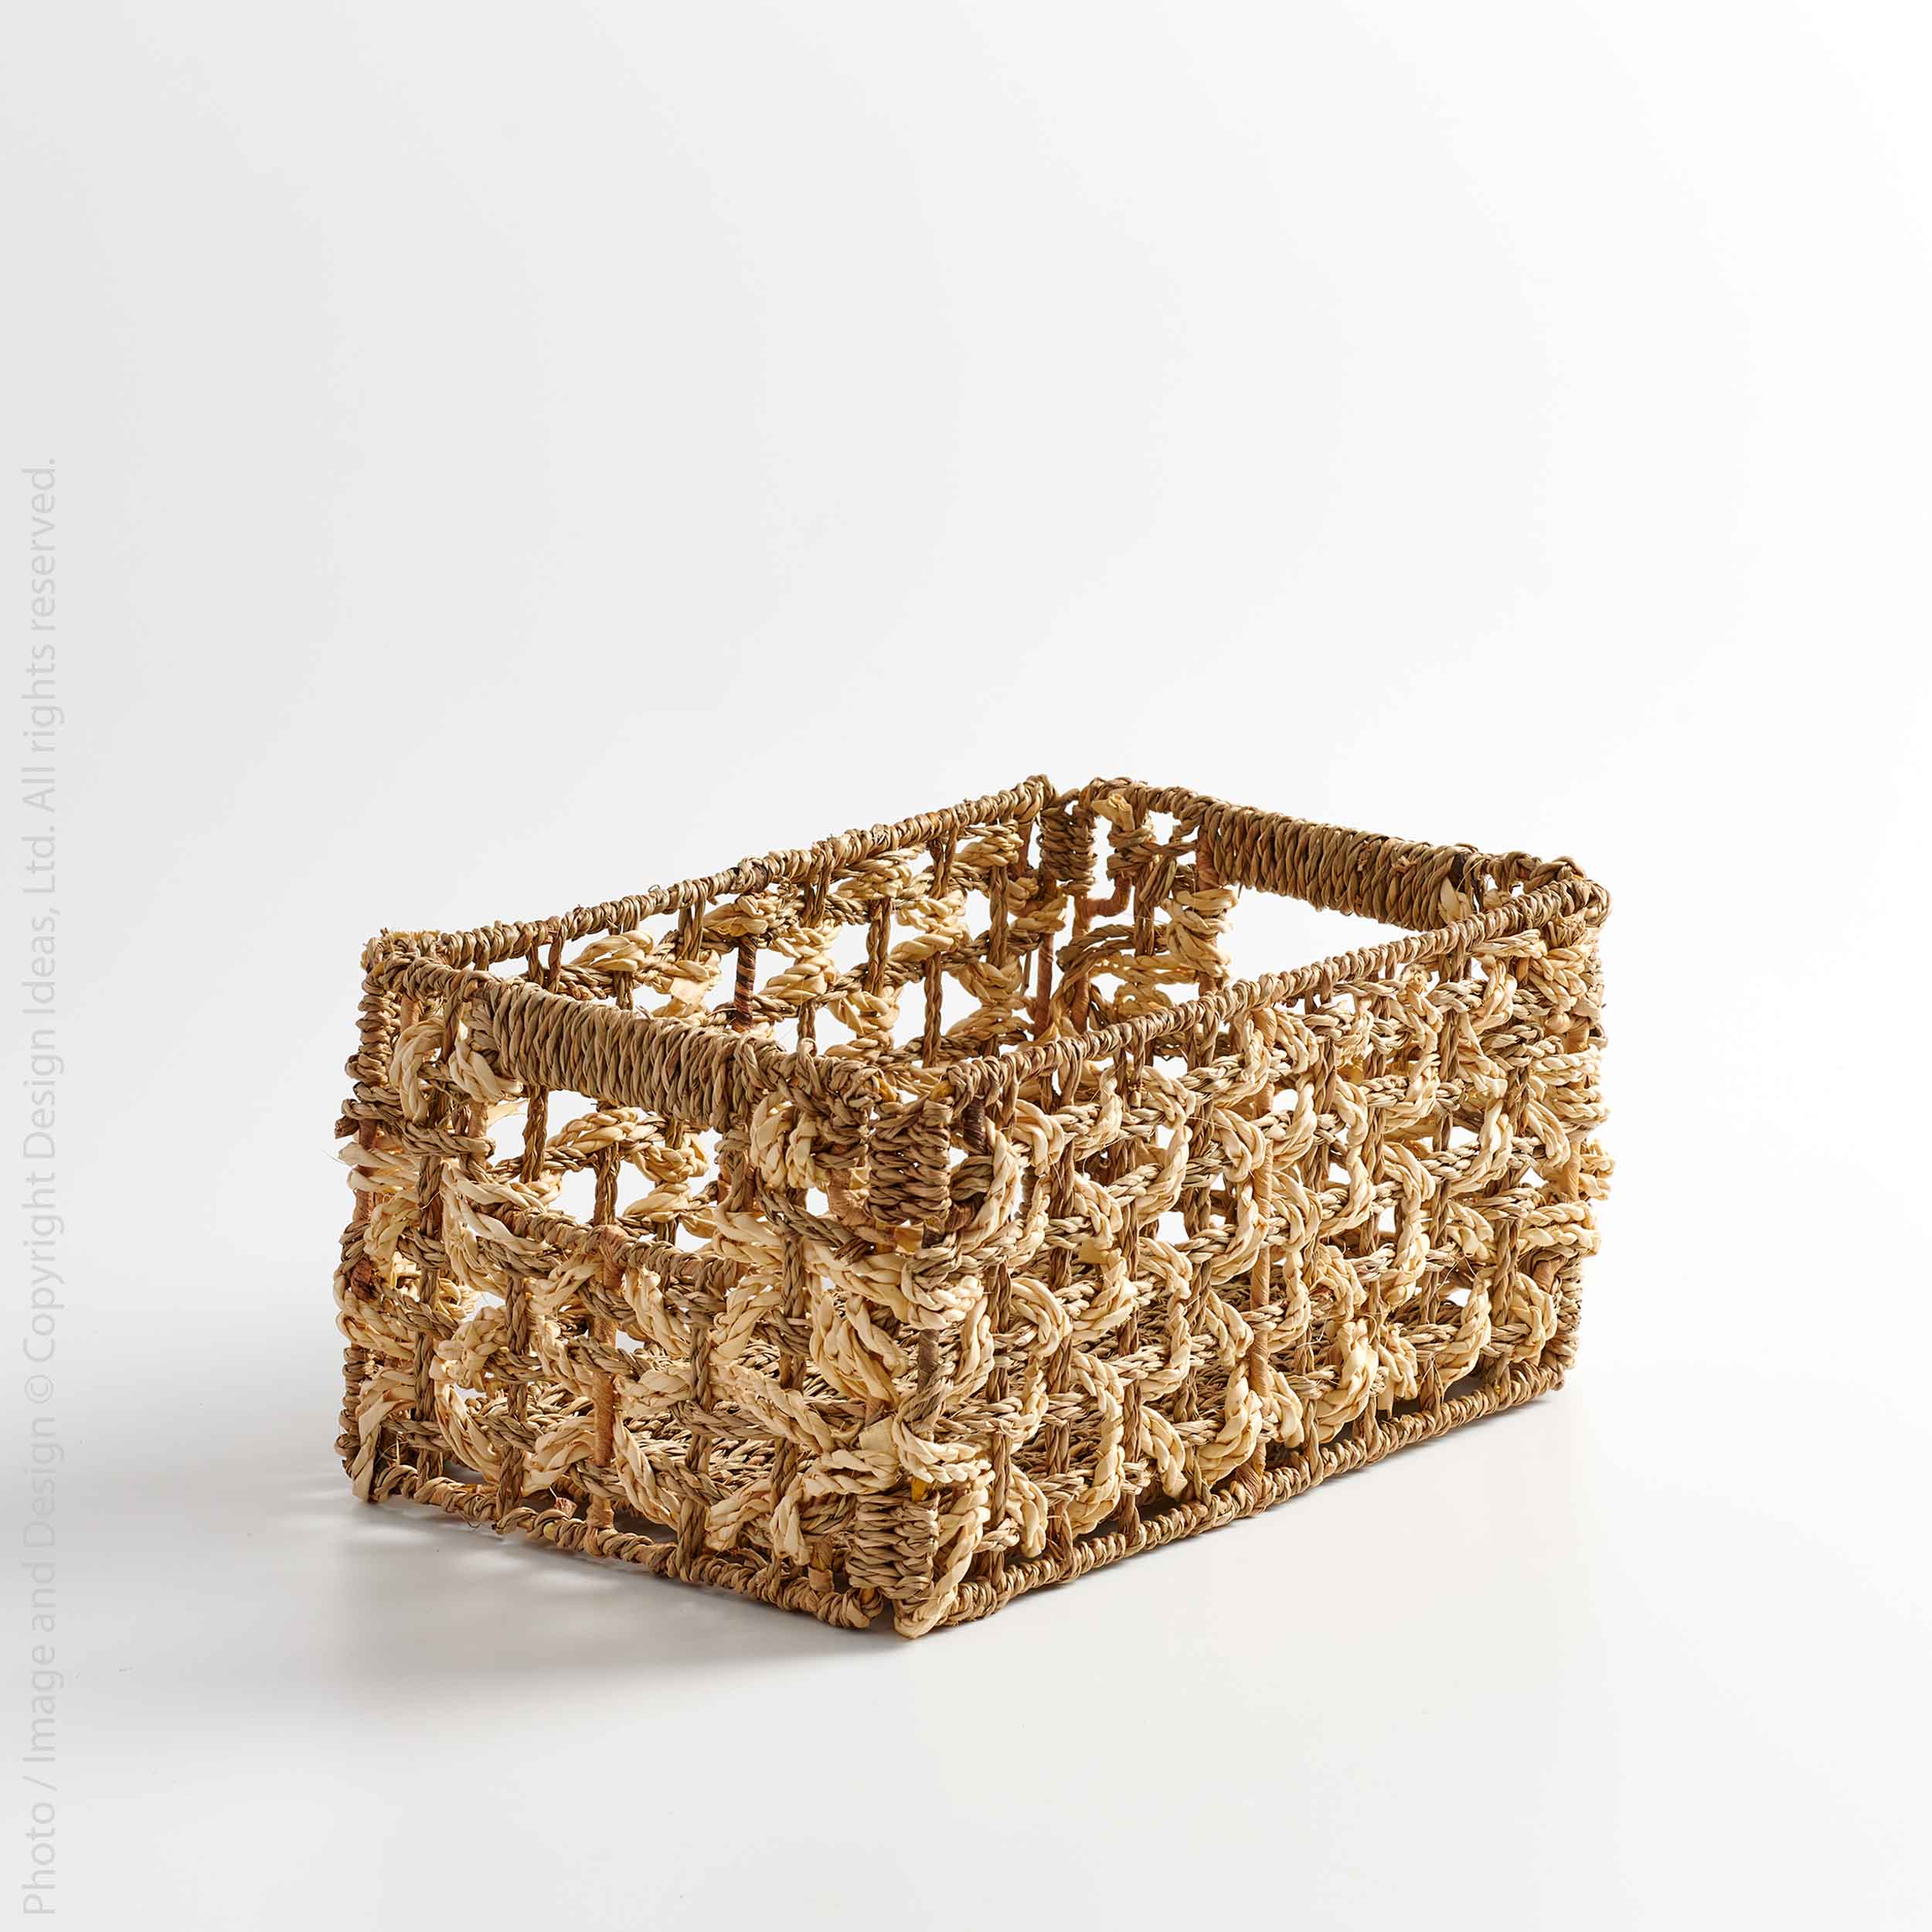 Mensch™ Small Hand Woven Palm and Seagrass Basket (7.8 x 11.8 x 6.3in.)